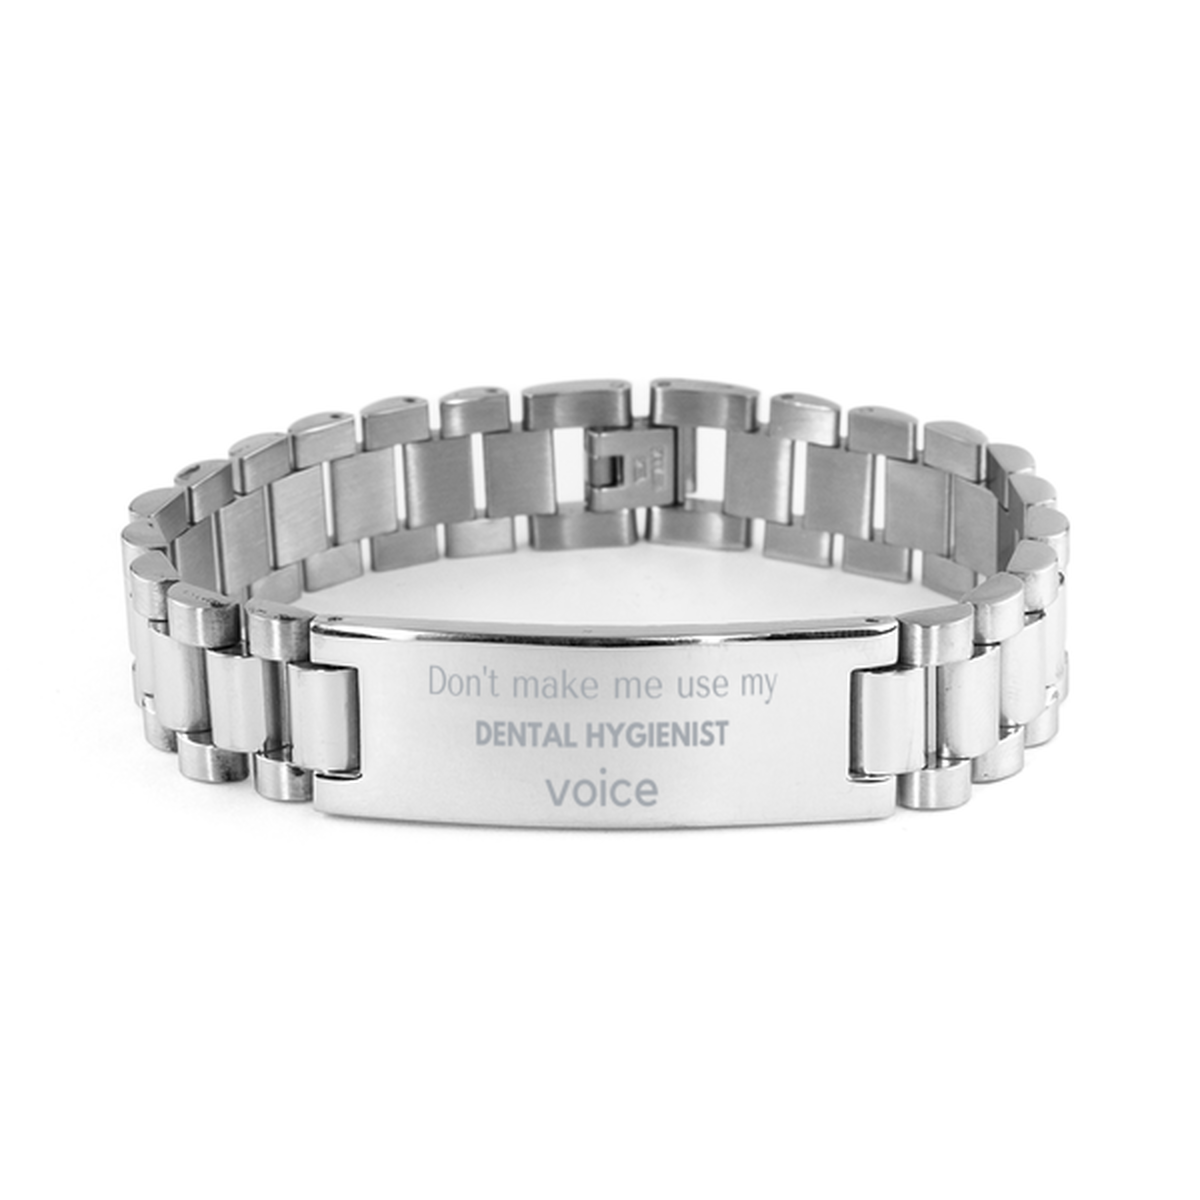 Don't make me use my Dental Hygienist voice, Sarcasm Dental Hygienist Gifts, Christmas Dental Hygienist Ladder Stainless Steel Bracelet Birthday Unique Gifts For Dental Hygienist Coworkers, Men, Women, Colleague, Friends